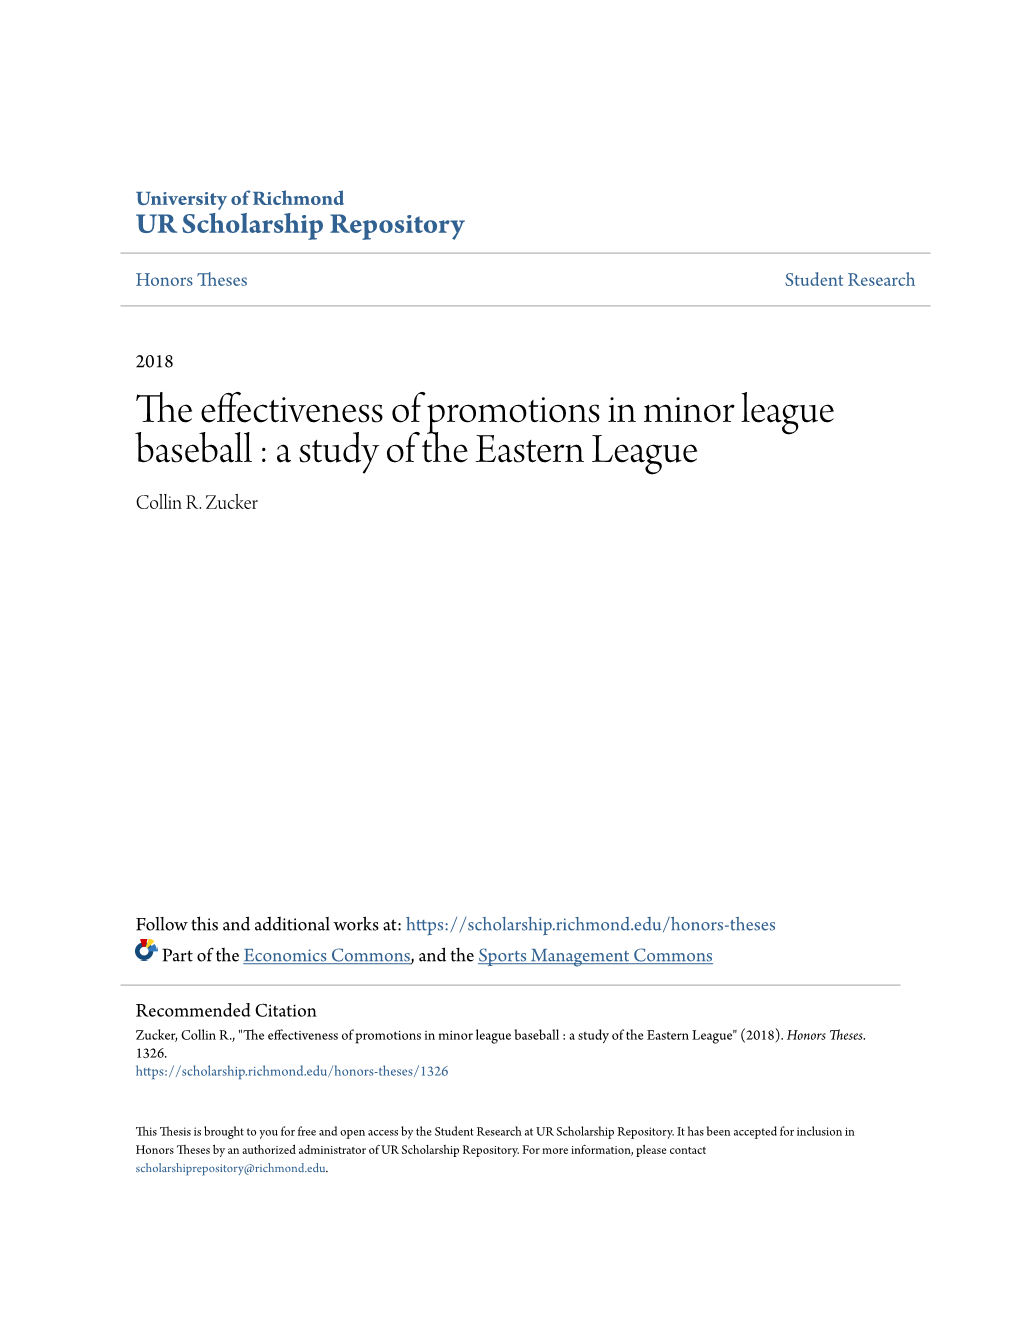 The Effectiveness of Promotions in Minor League Baseball : a Study of the Eastern League Collin R